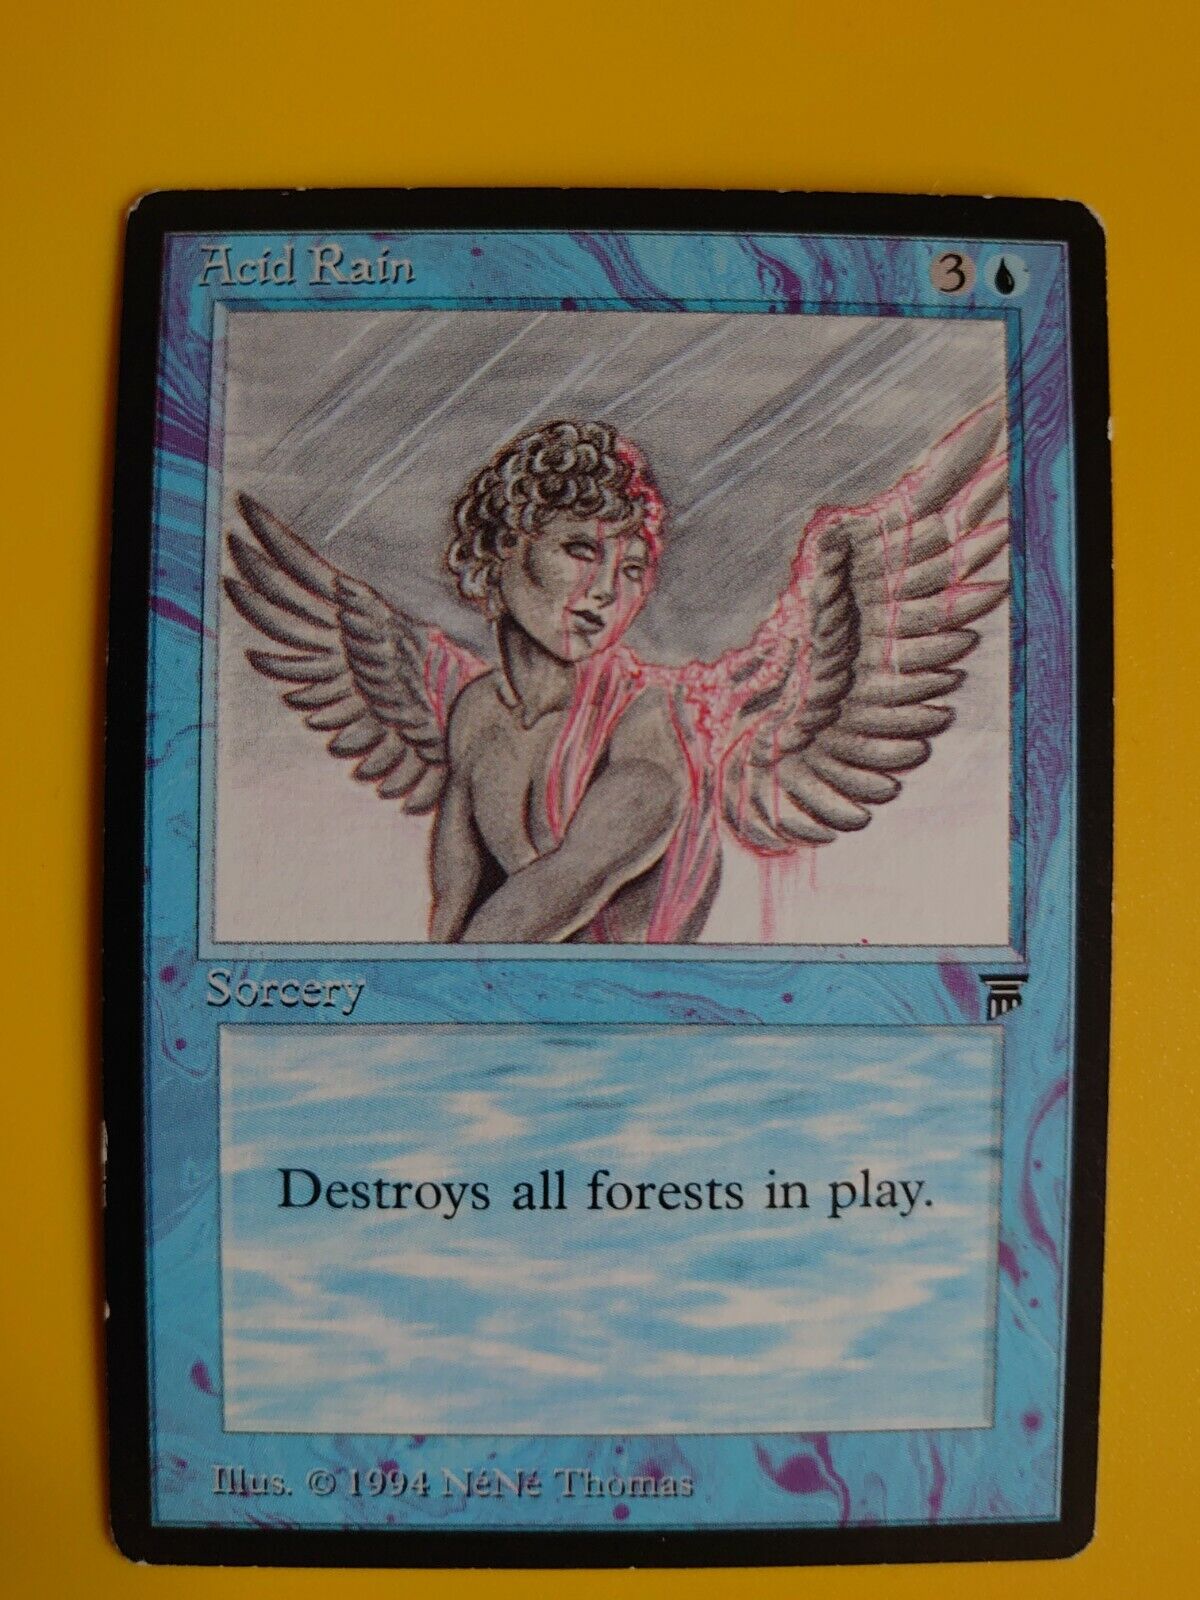 MTG Card. Acid Rain. Legends 1994. Destroy all forests in play. Wear as pictures